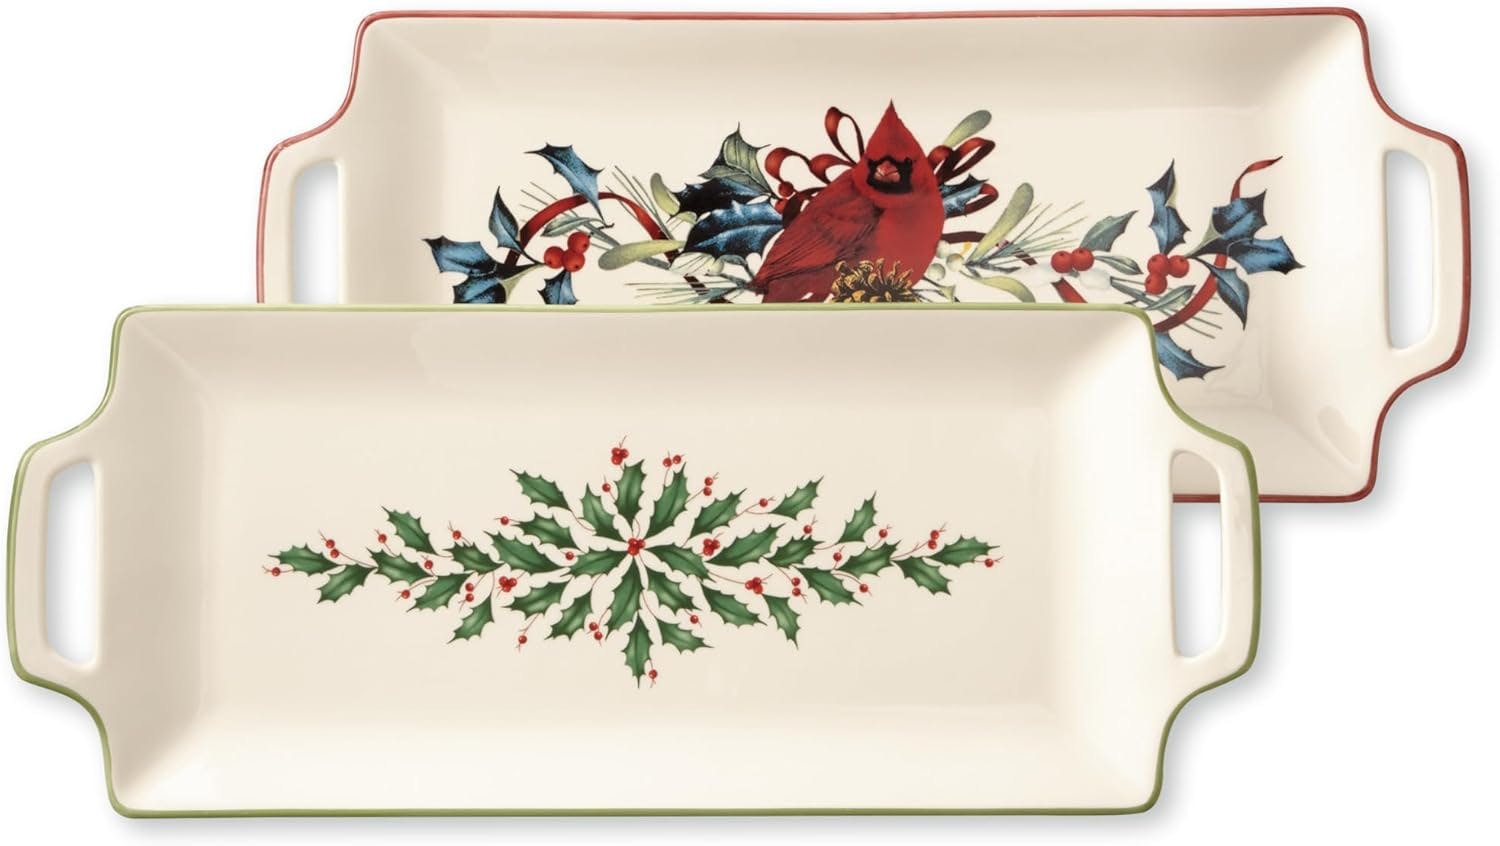 Festive Ivory Porcelain Holiday Hors D'Oeuvre Tray with Holly Motif